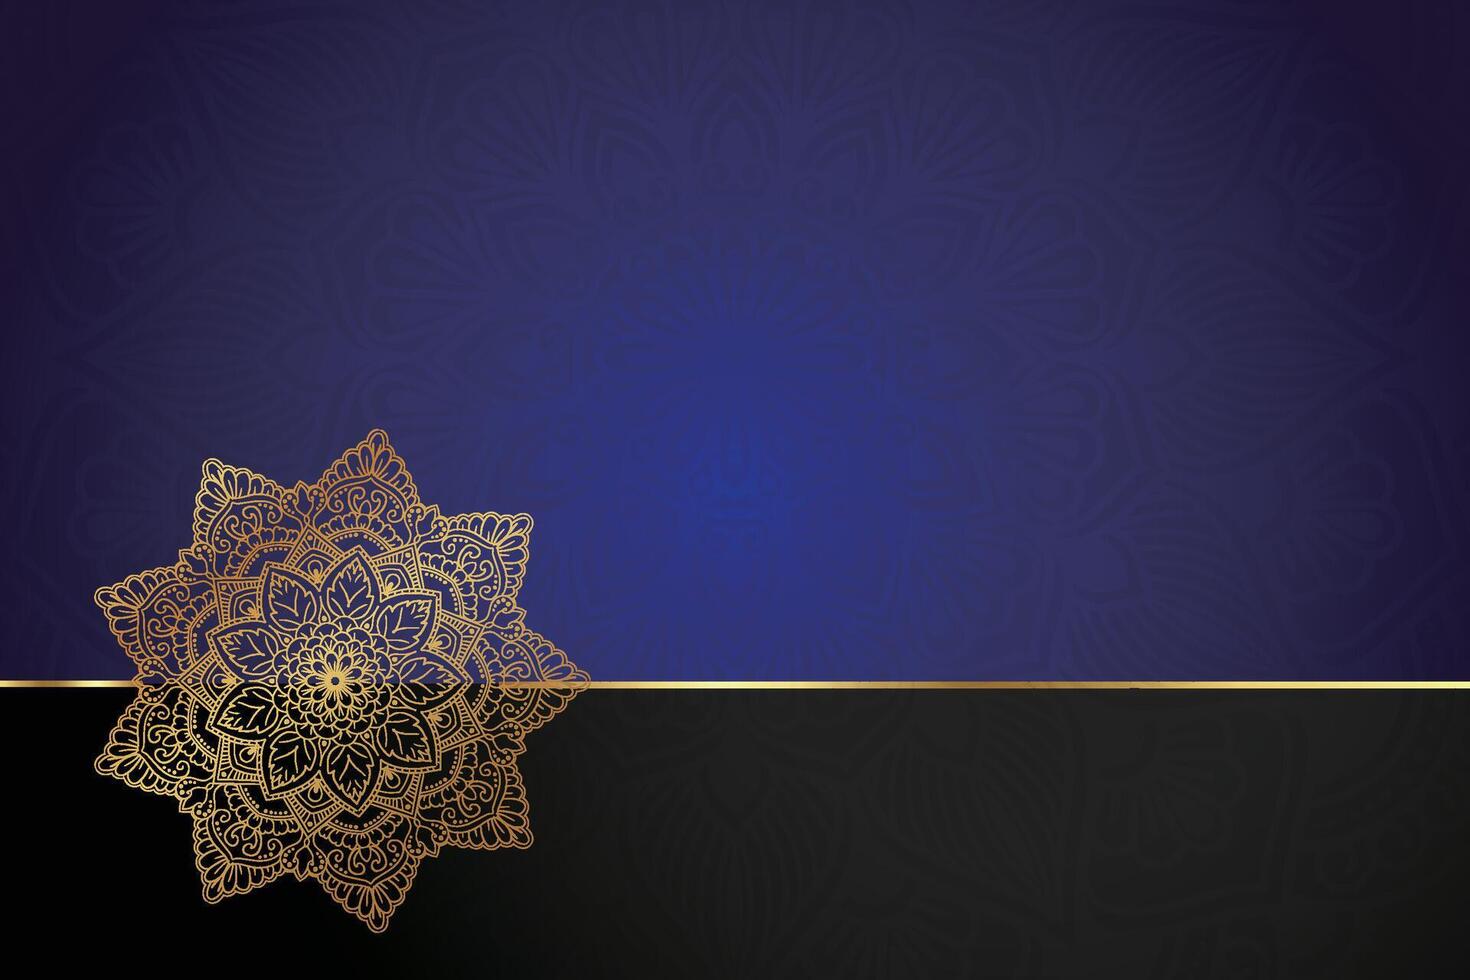 Luxury background, design template for greeting cards, postcards, invitations, posters, flyers. vector